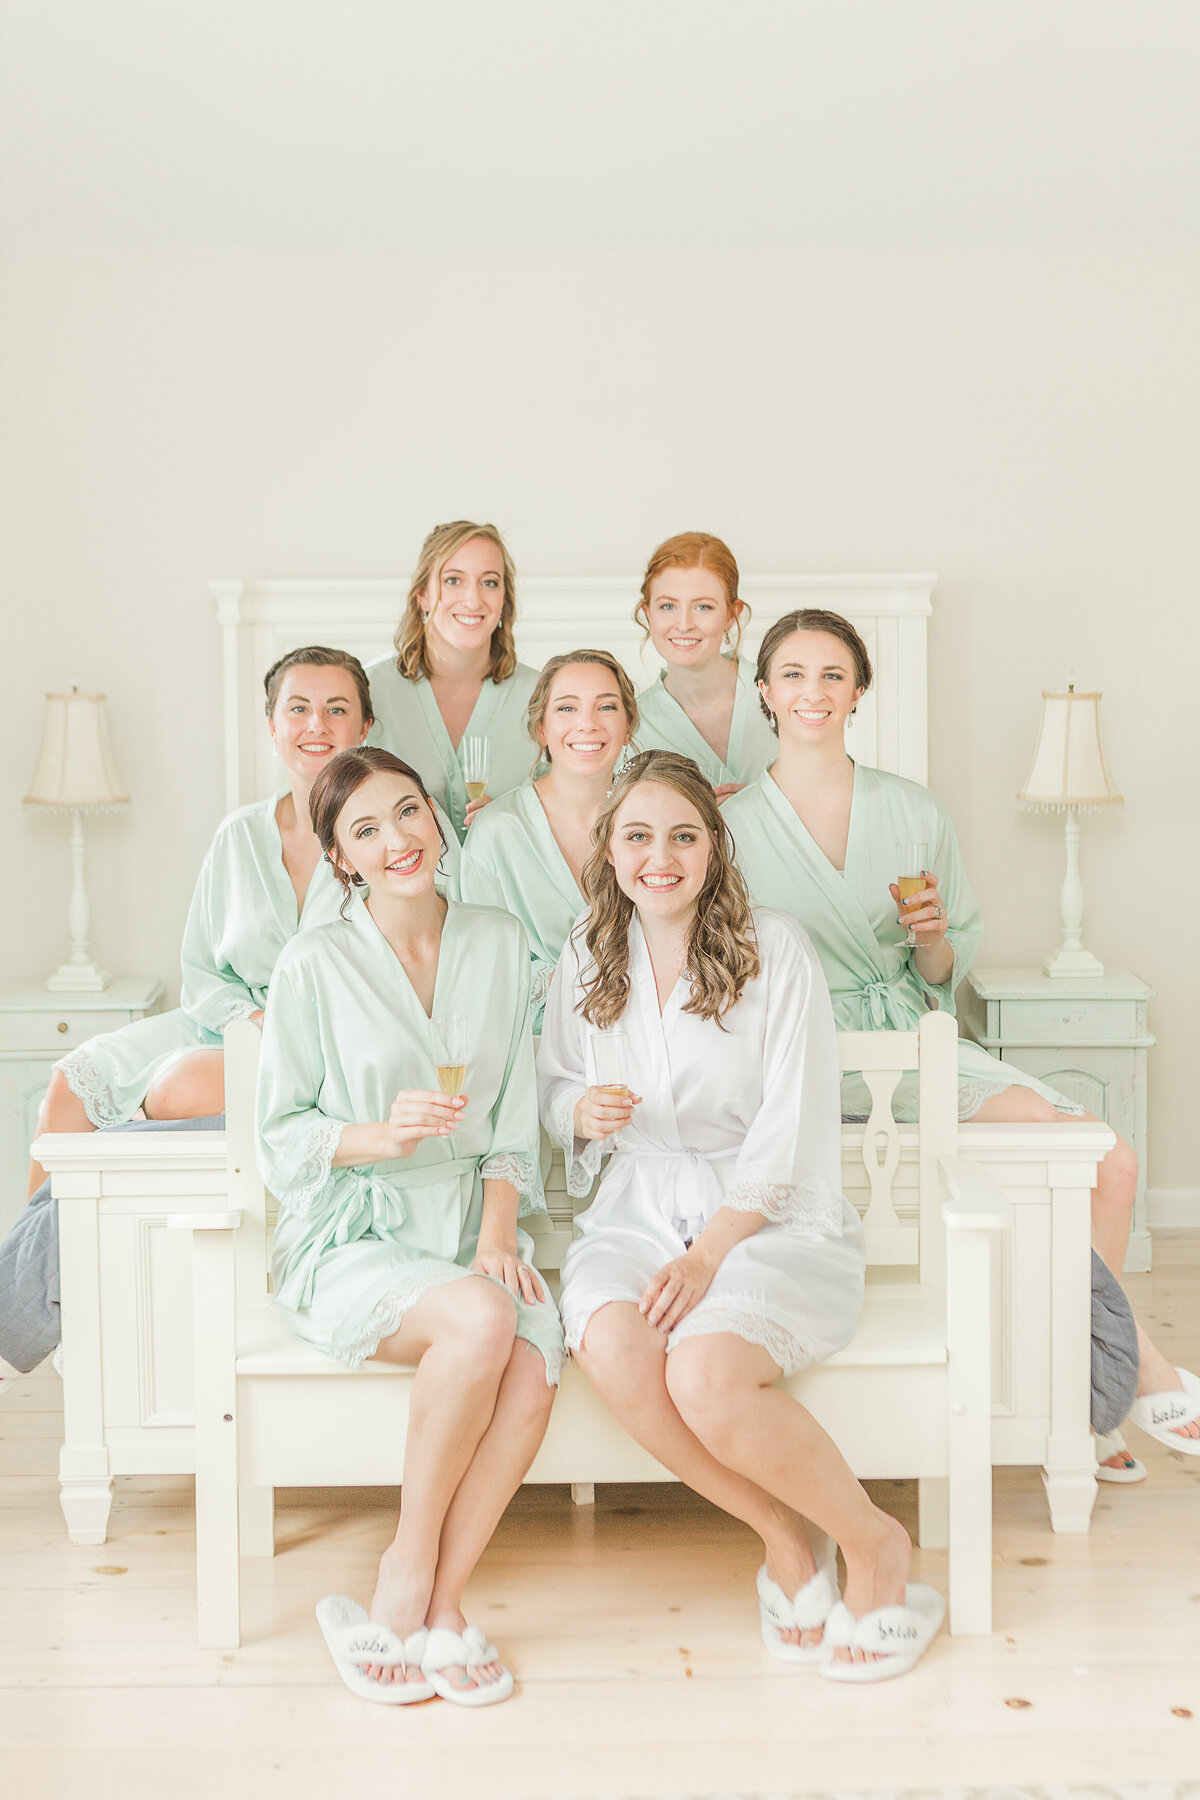 A bride and her bridesmaids gather for a formal getting ready portrait. The bride is in a white robe and her bridesmaids in pale green robes. They are all holding glasses of champagne, sitting on a bed and smiling at the camera.